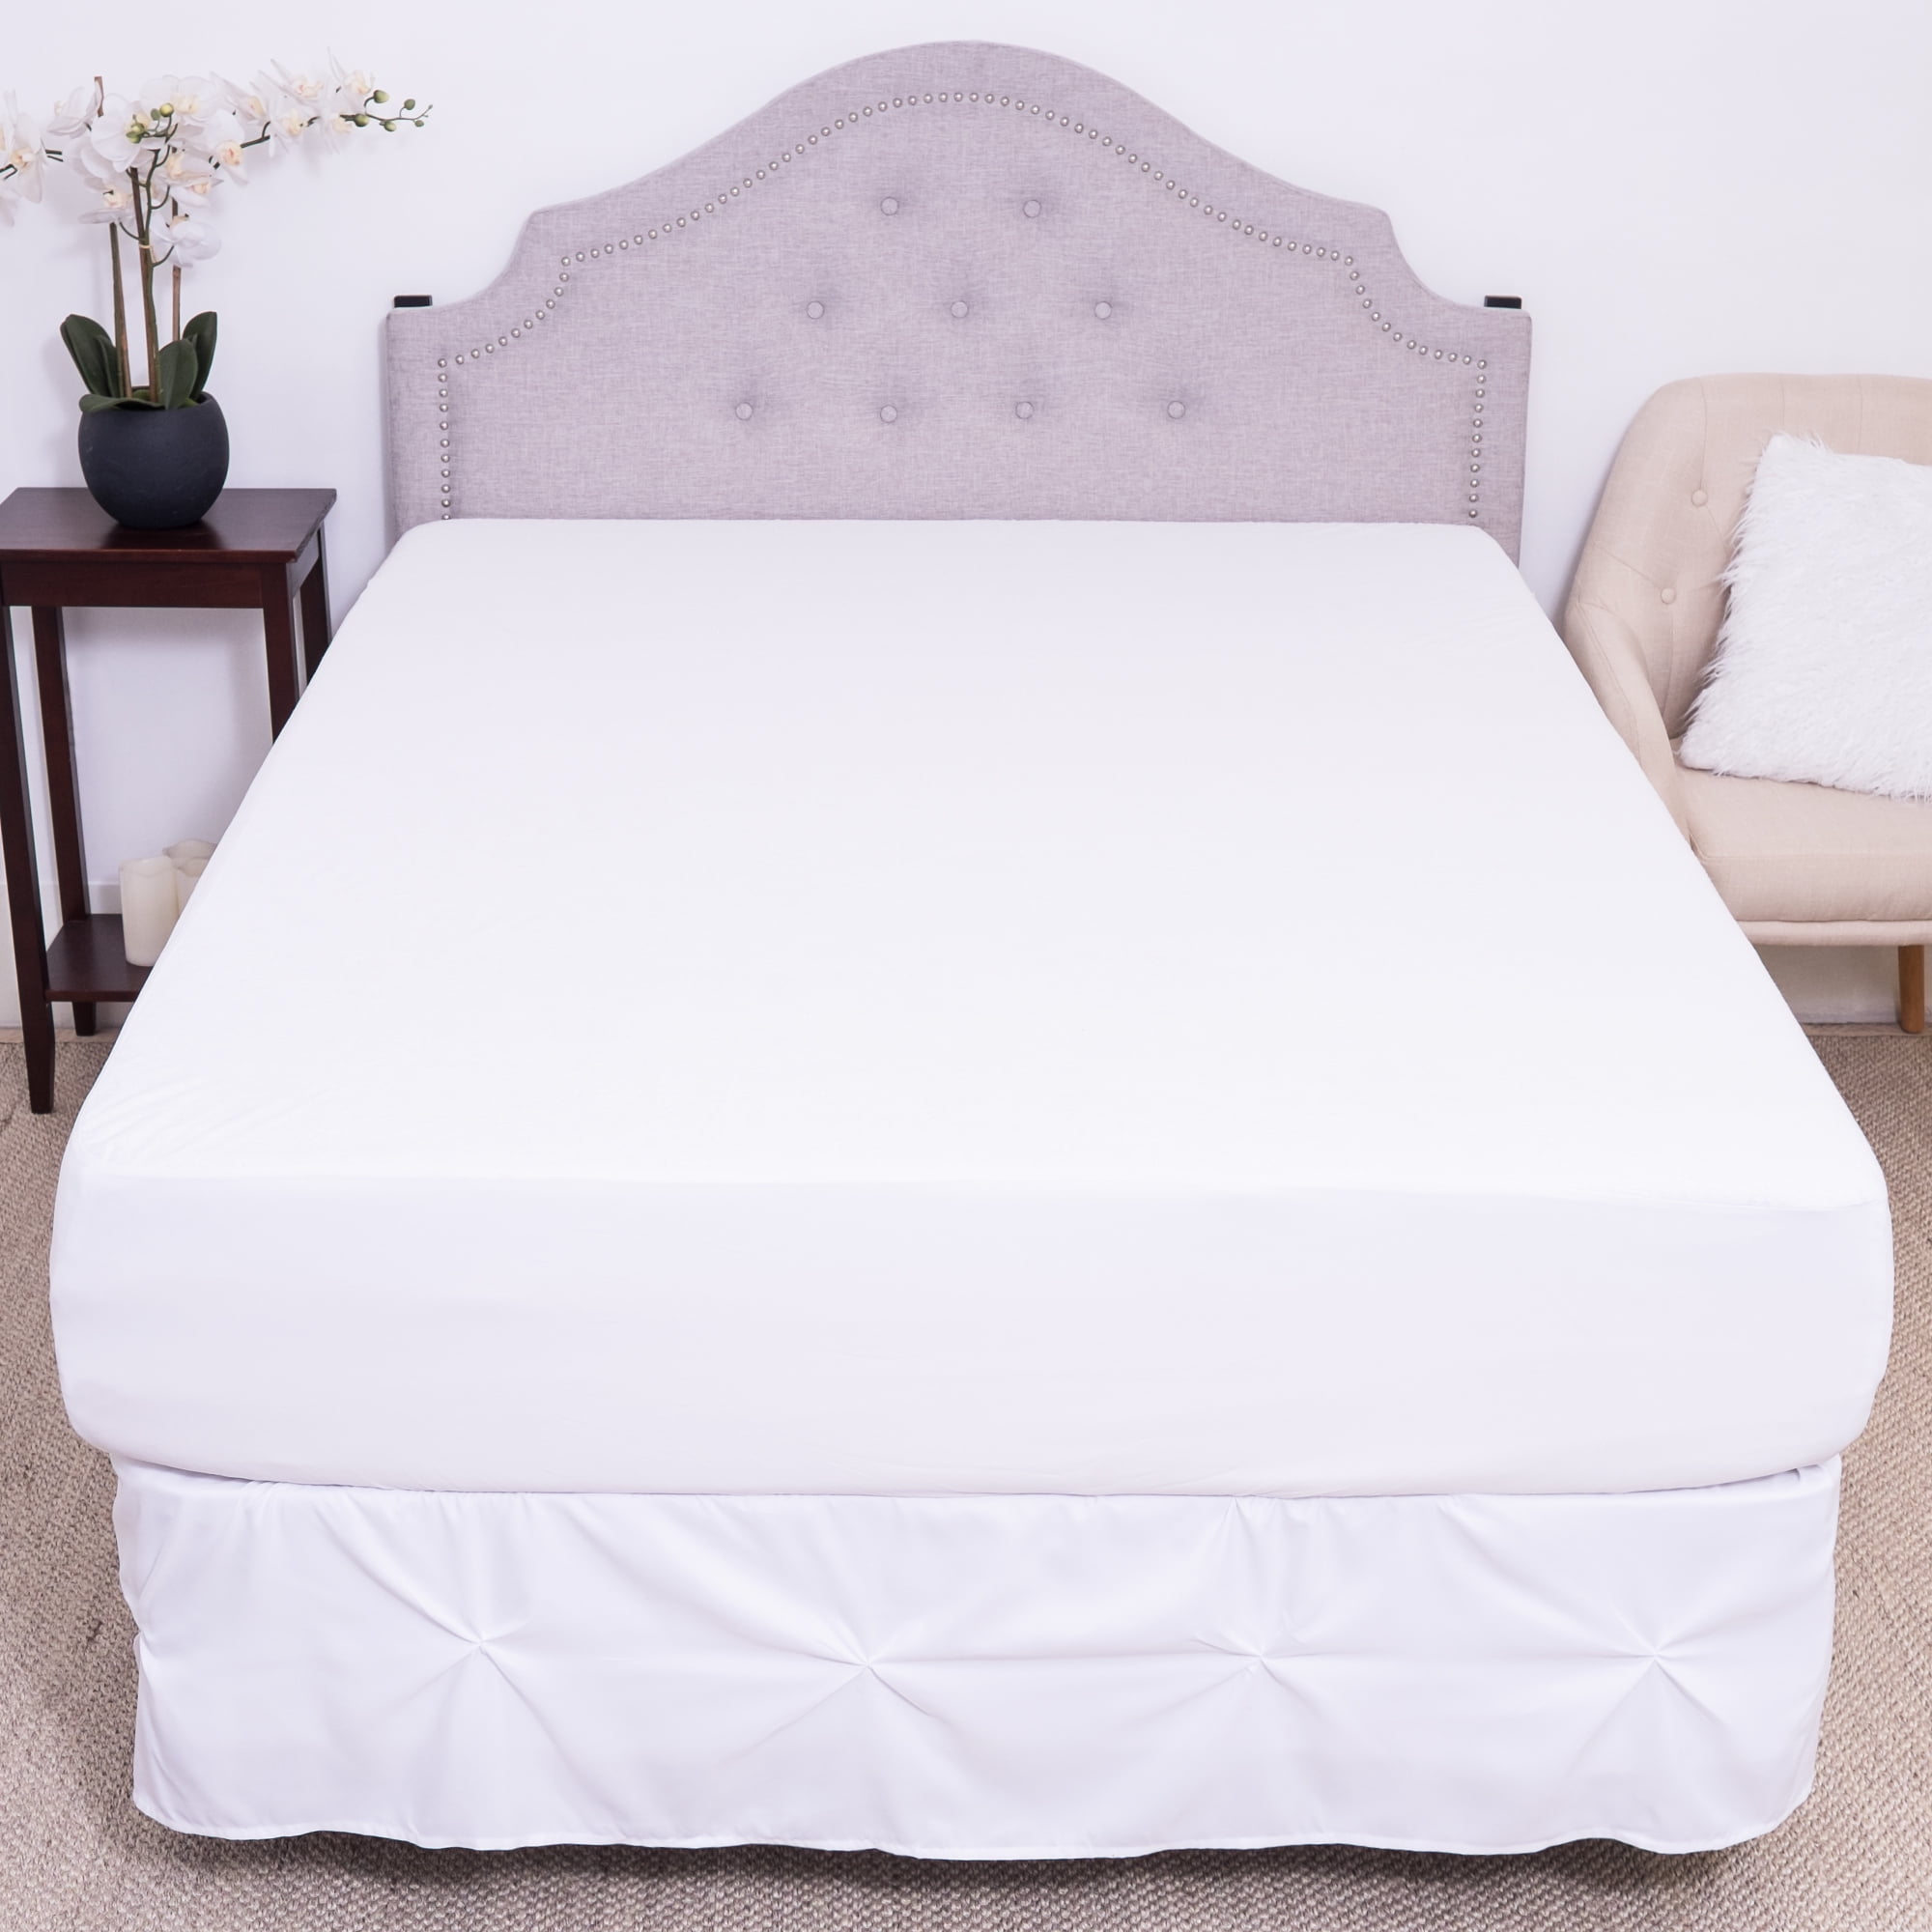 Waterproof Fitted Sheet Mattress Cover Pad Protector Terry Towel Hypoallergenic